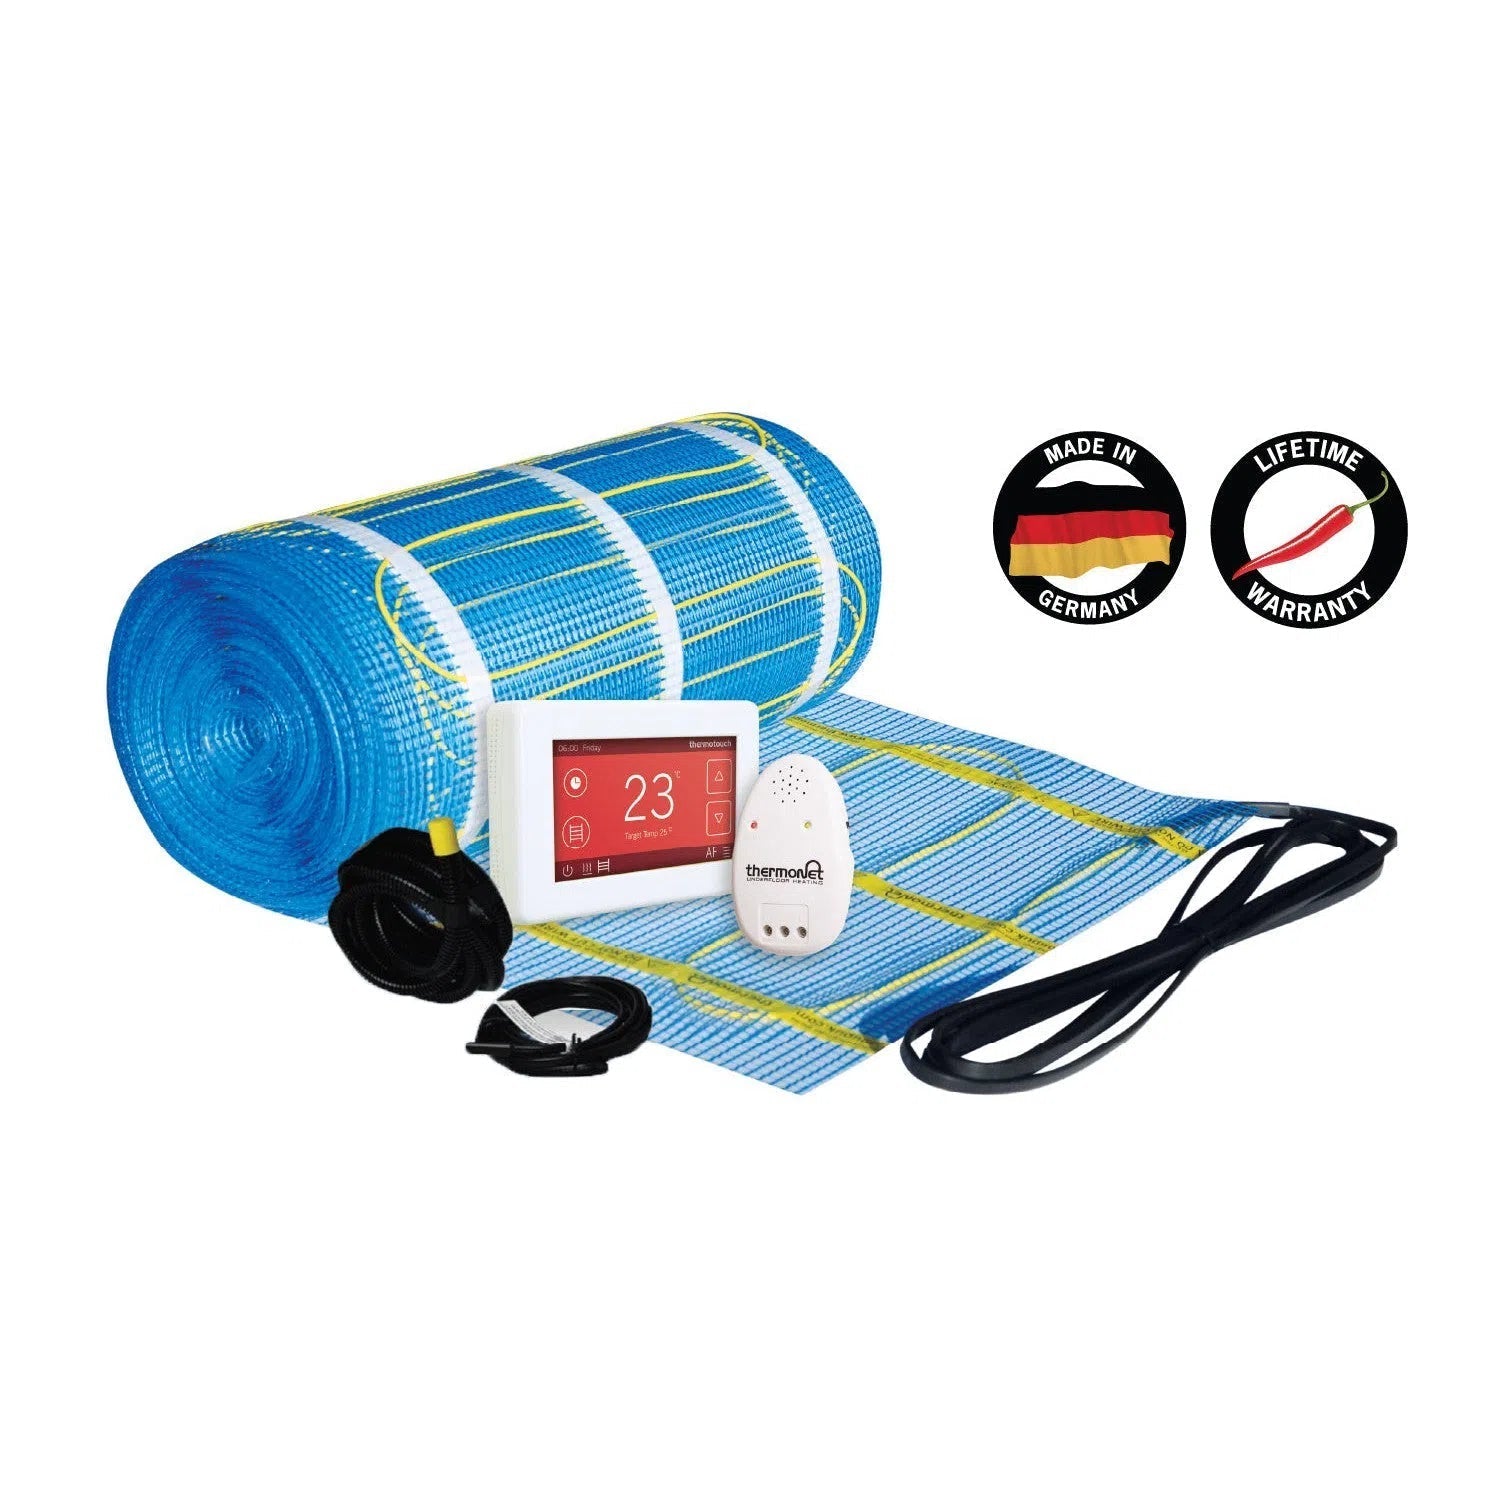 Thermonet 200W/m² In Screed Heating Kit - Dual Controller